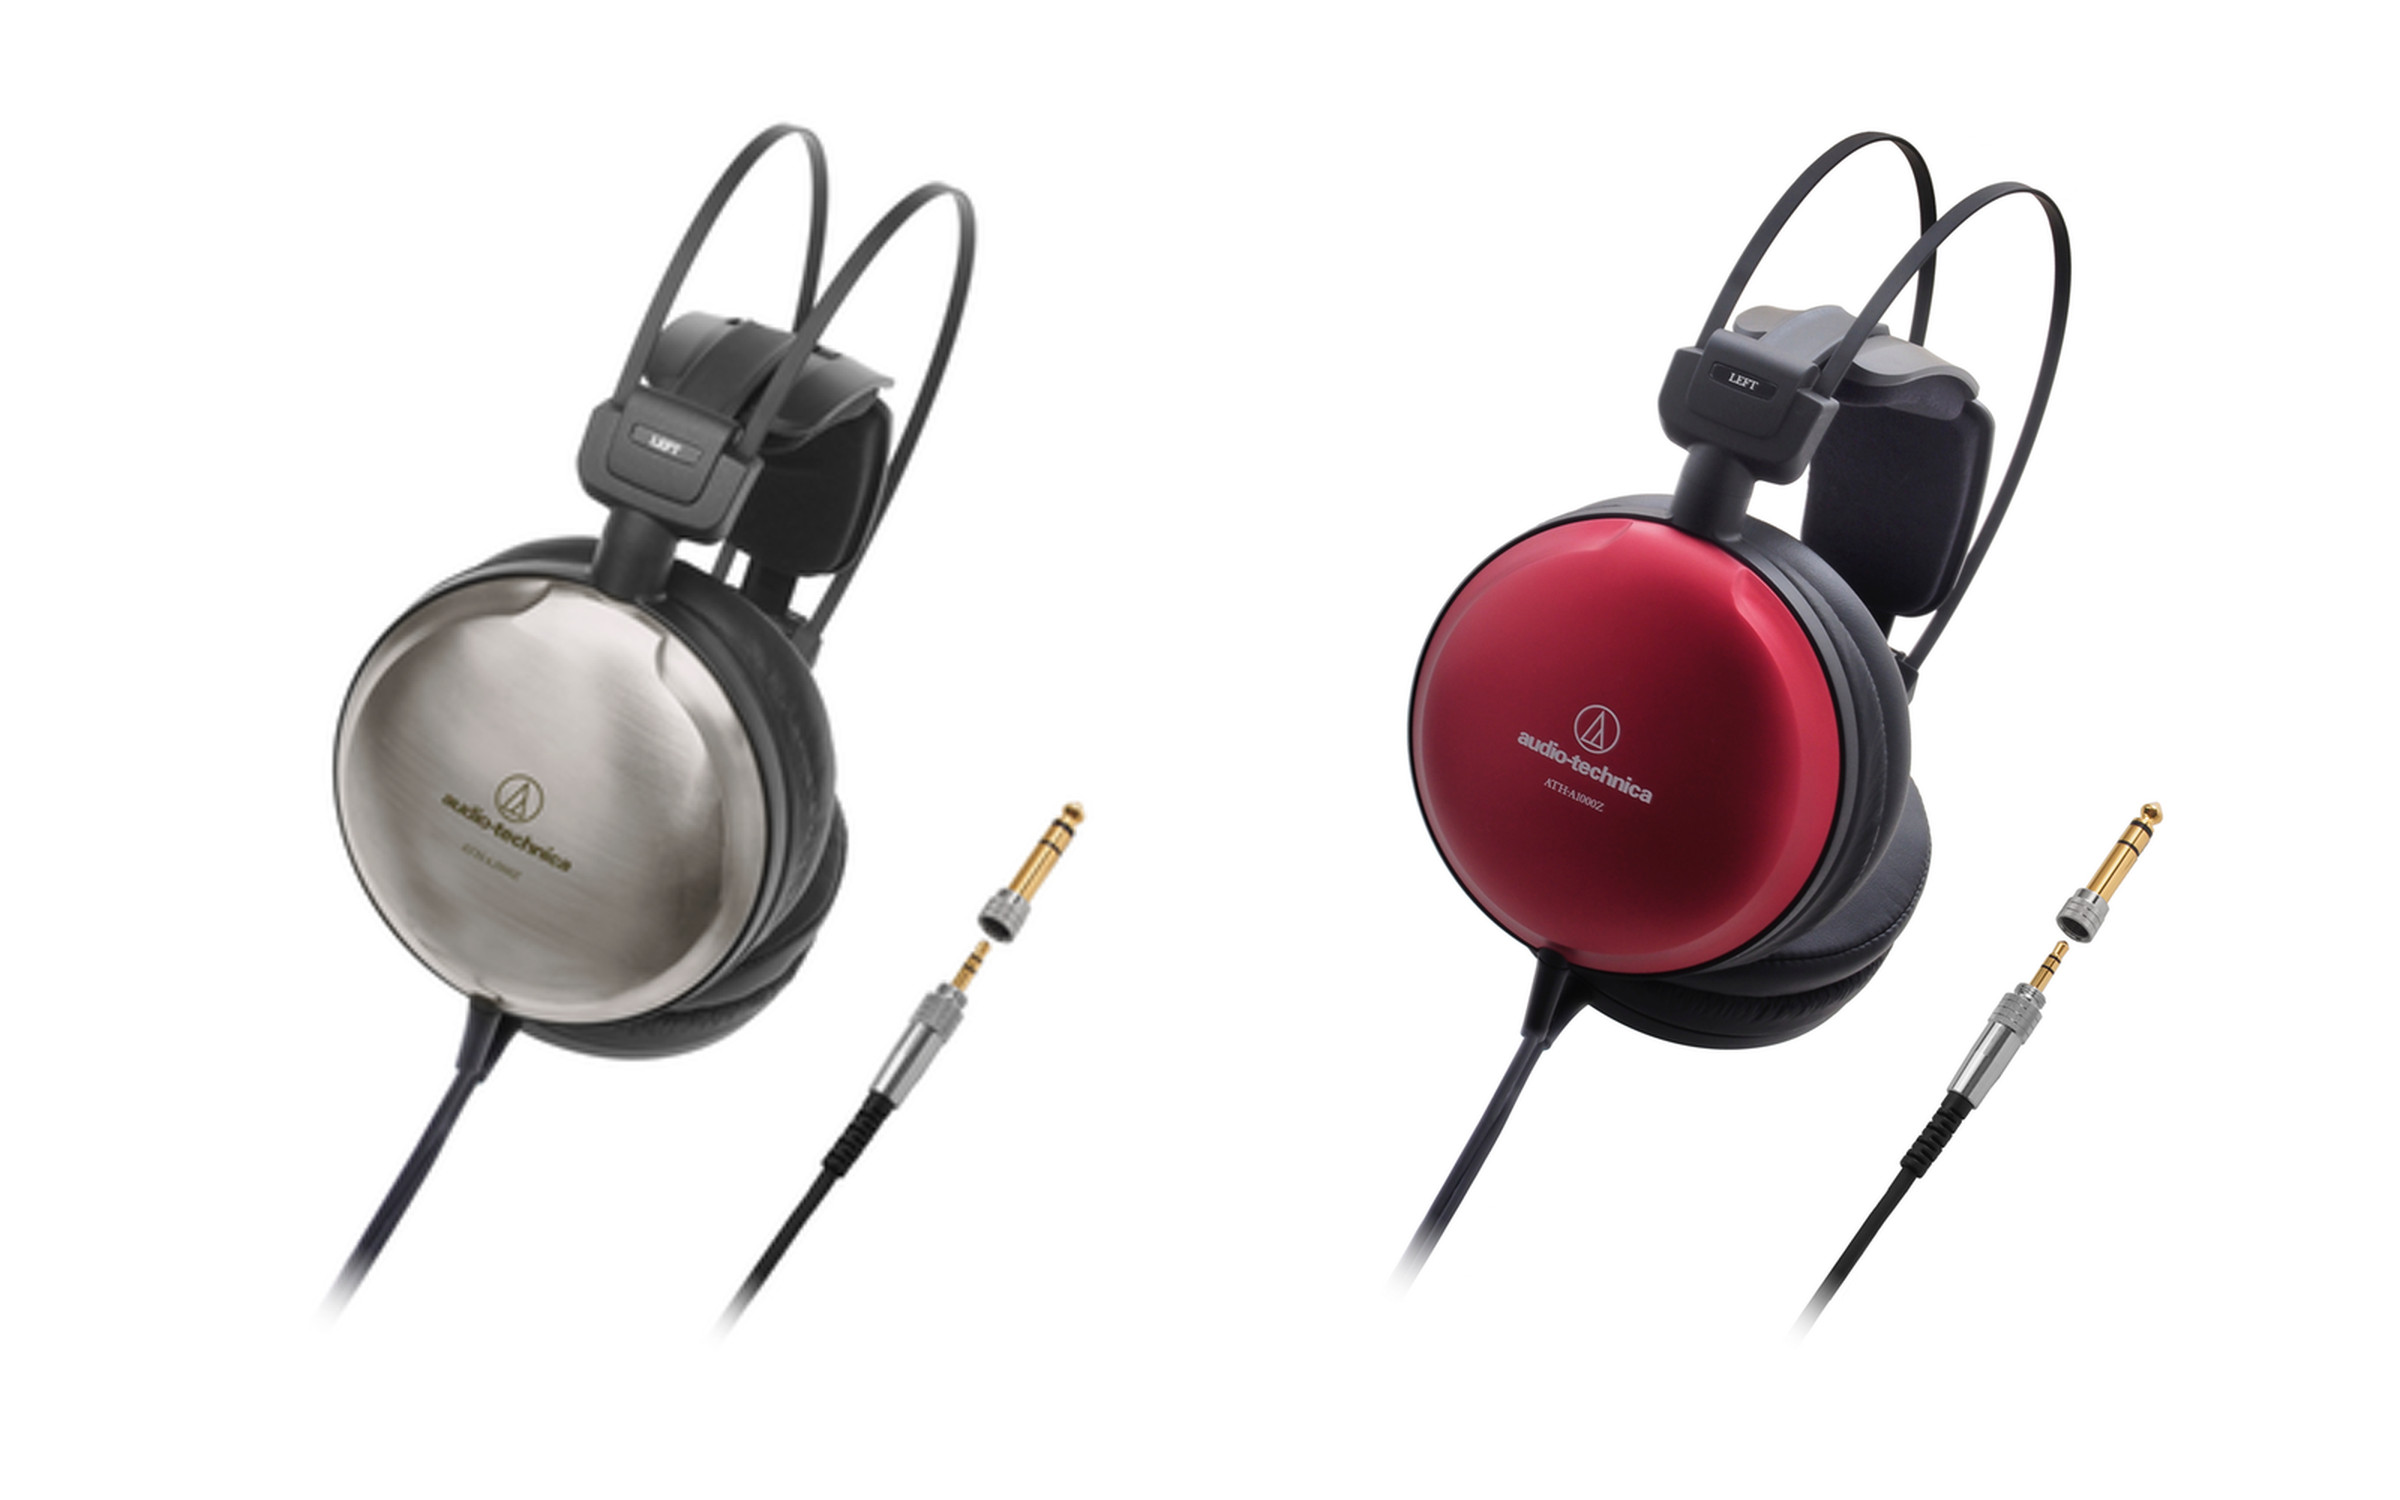 Audio-Technica A2000Z (left) and A1000Z (right).